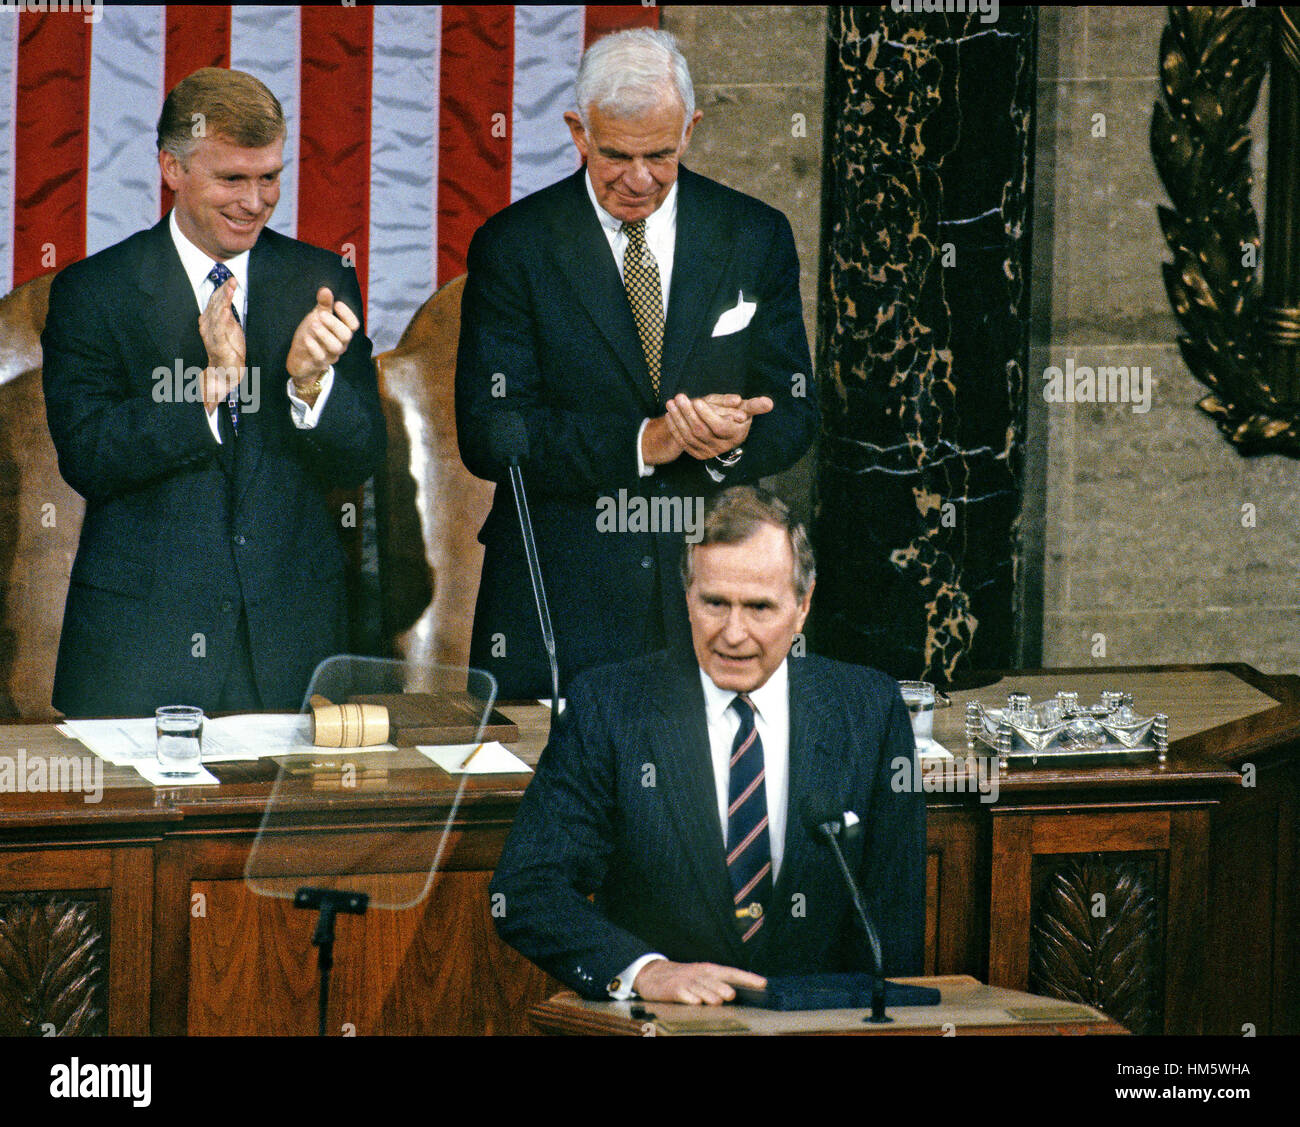 United States President George H.W. Bush speaks to a Joint Session of the U.S. Congress in the U.S. House Chamber in the Capitol in Washington, D.C. to report on the victory over Iraq in the Gulf War on March 6, 1991. U.S. Vice President Dan Quayle, left, Stock Photo